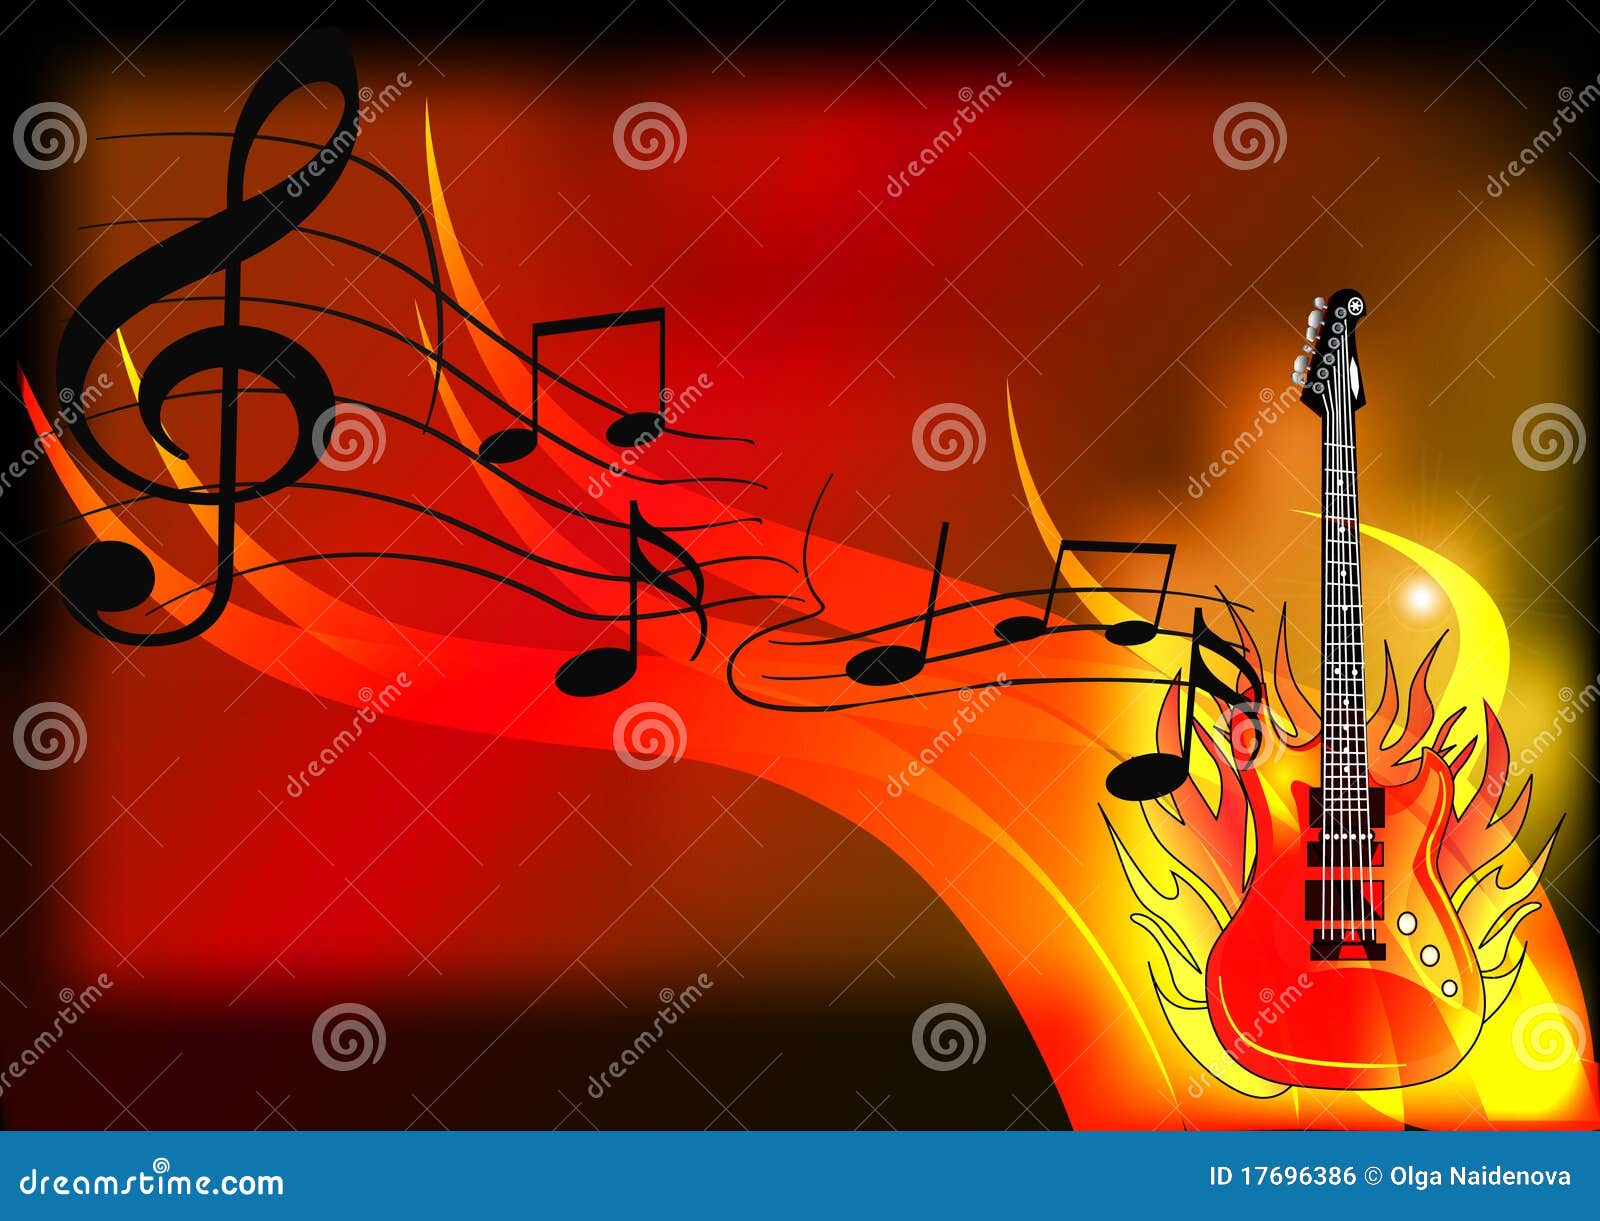 Music Background With Guitar And Fire Royalty Free Stock Image - Image: 17696386